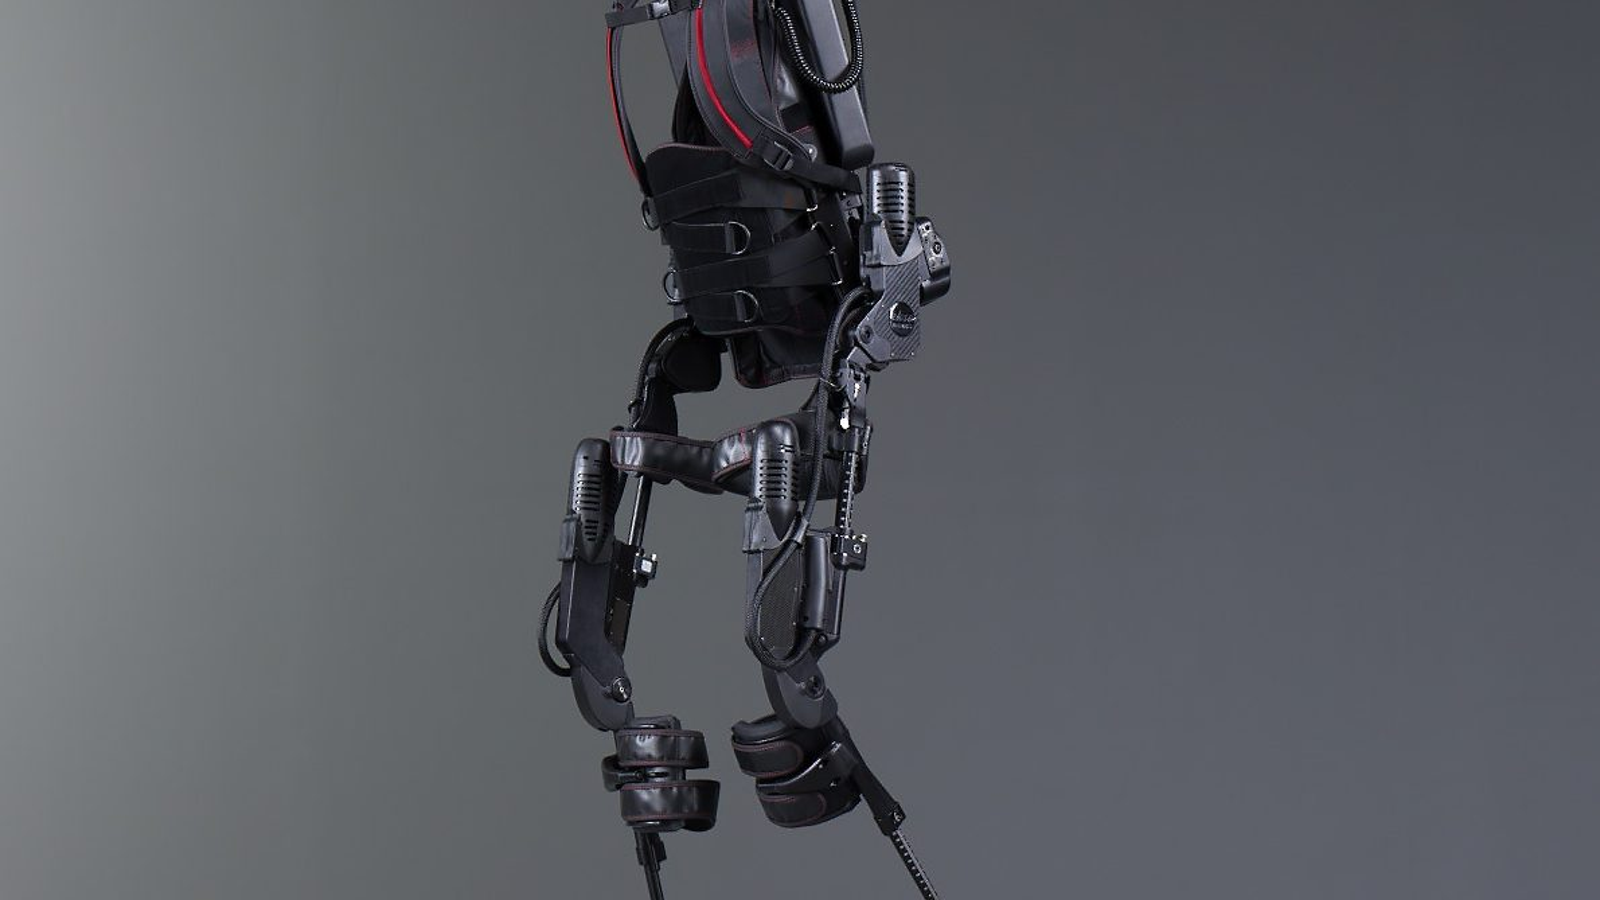 The market for robot exoskeletons is finally here, and they're nothing like the suits from Ironman or Aliens